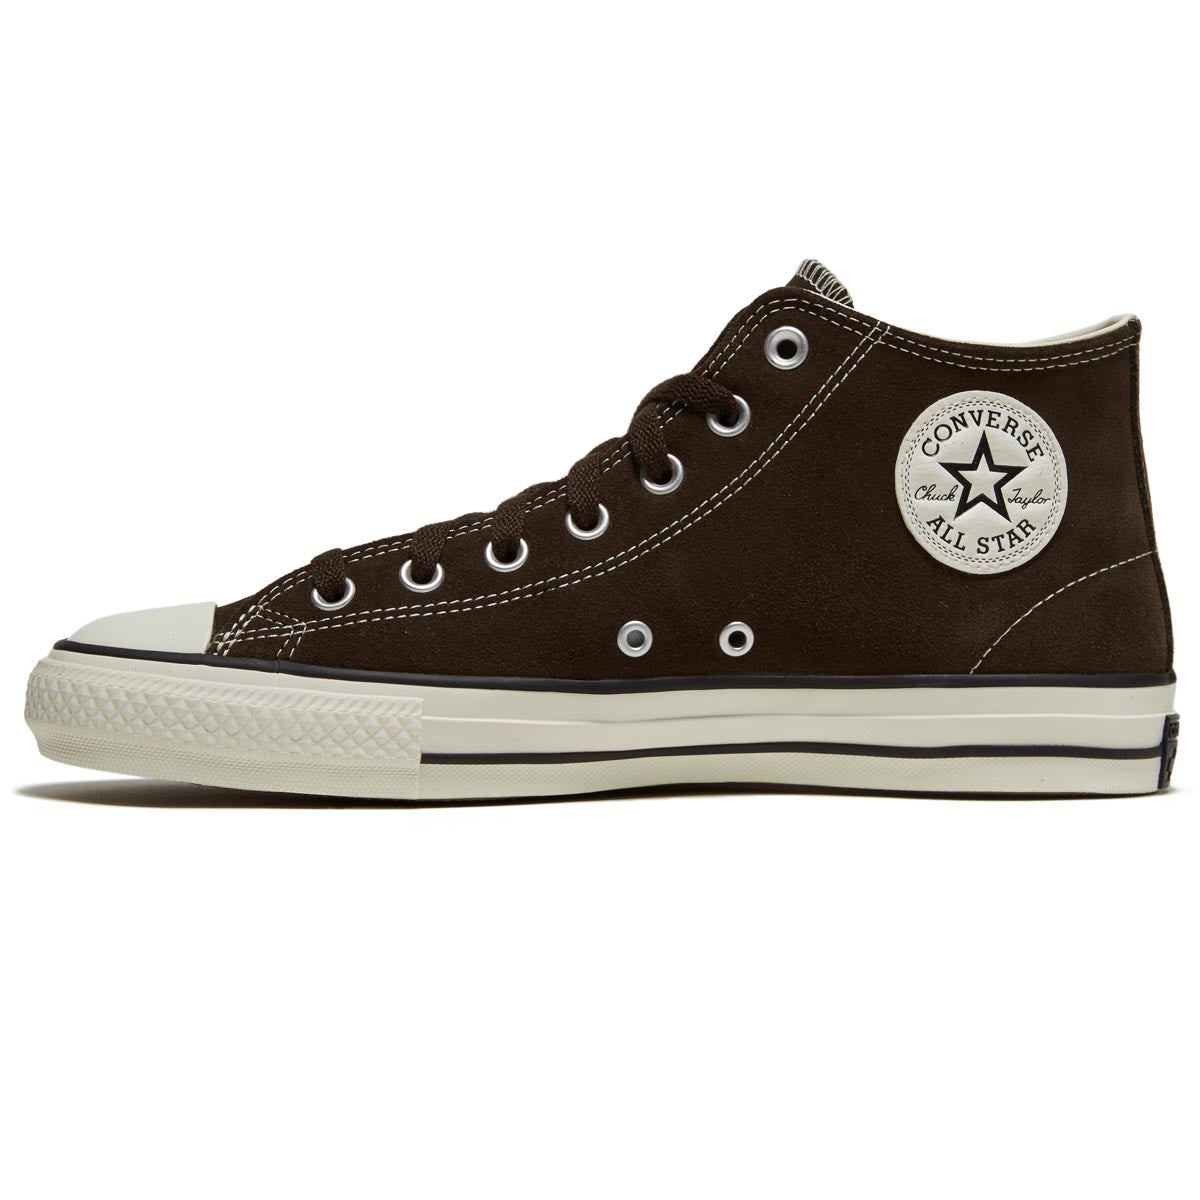 Converse Chuck Taylor All Star Pro Classic Suede Mid Shoes - Fresh Brew/Egret/Black image 2